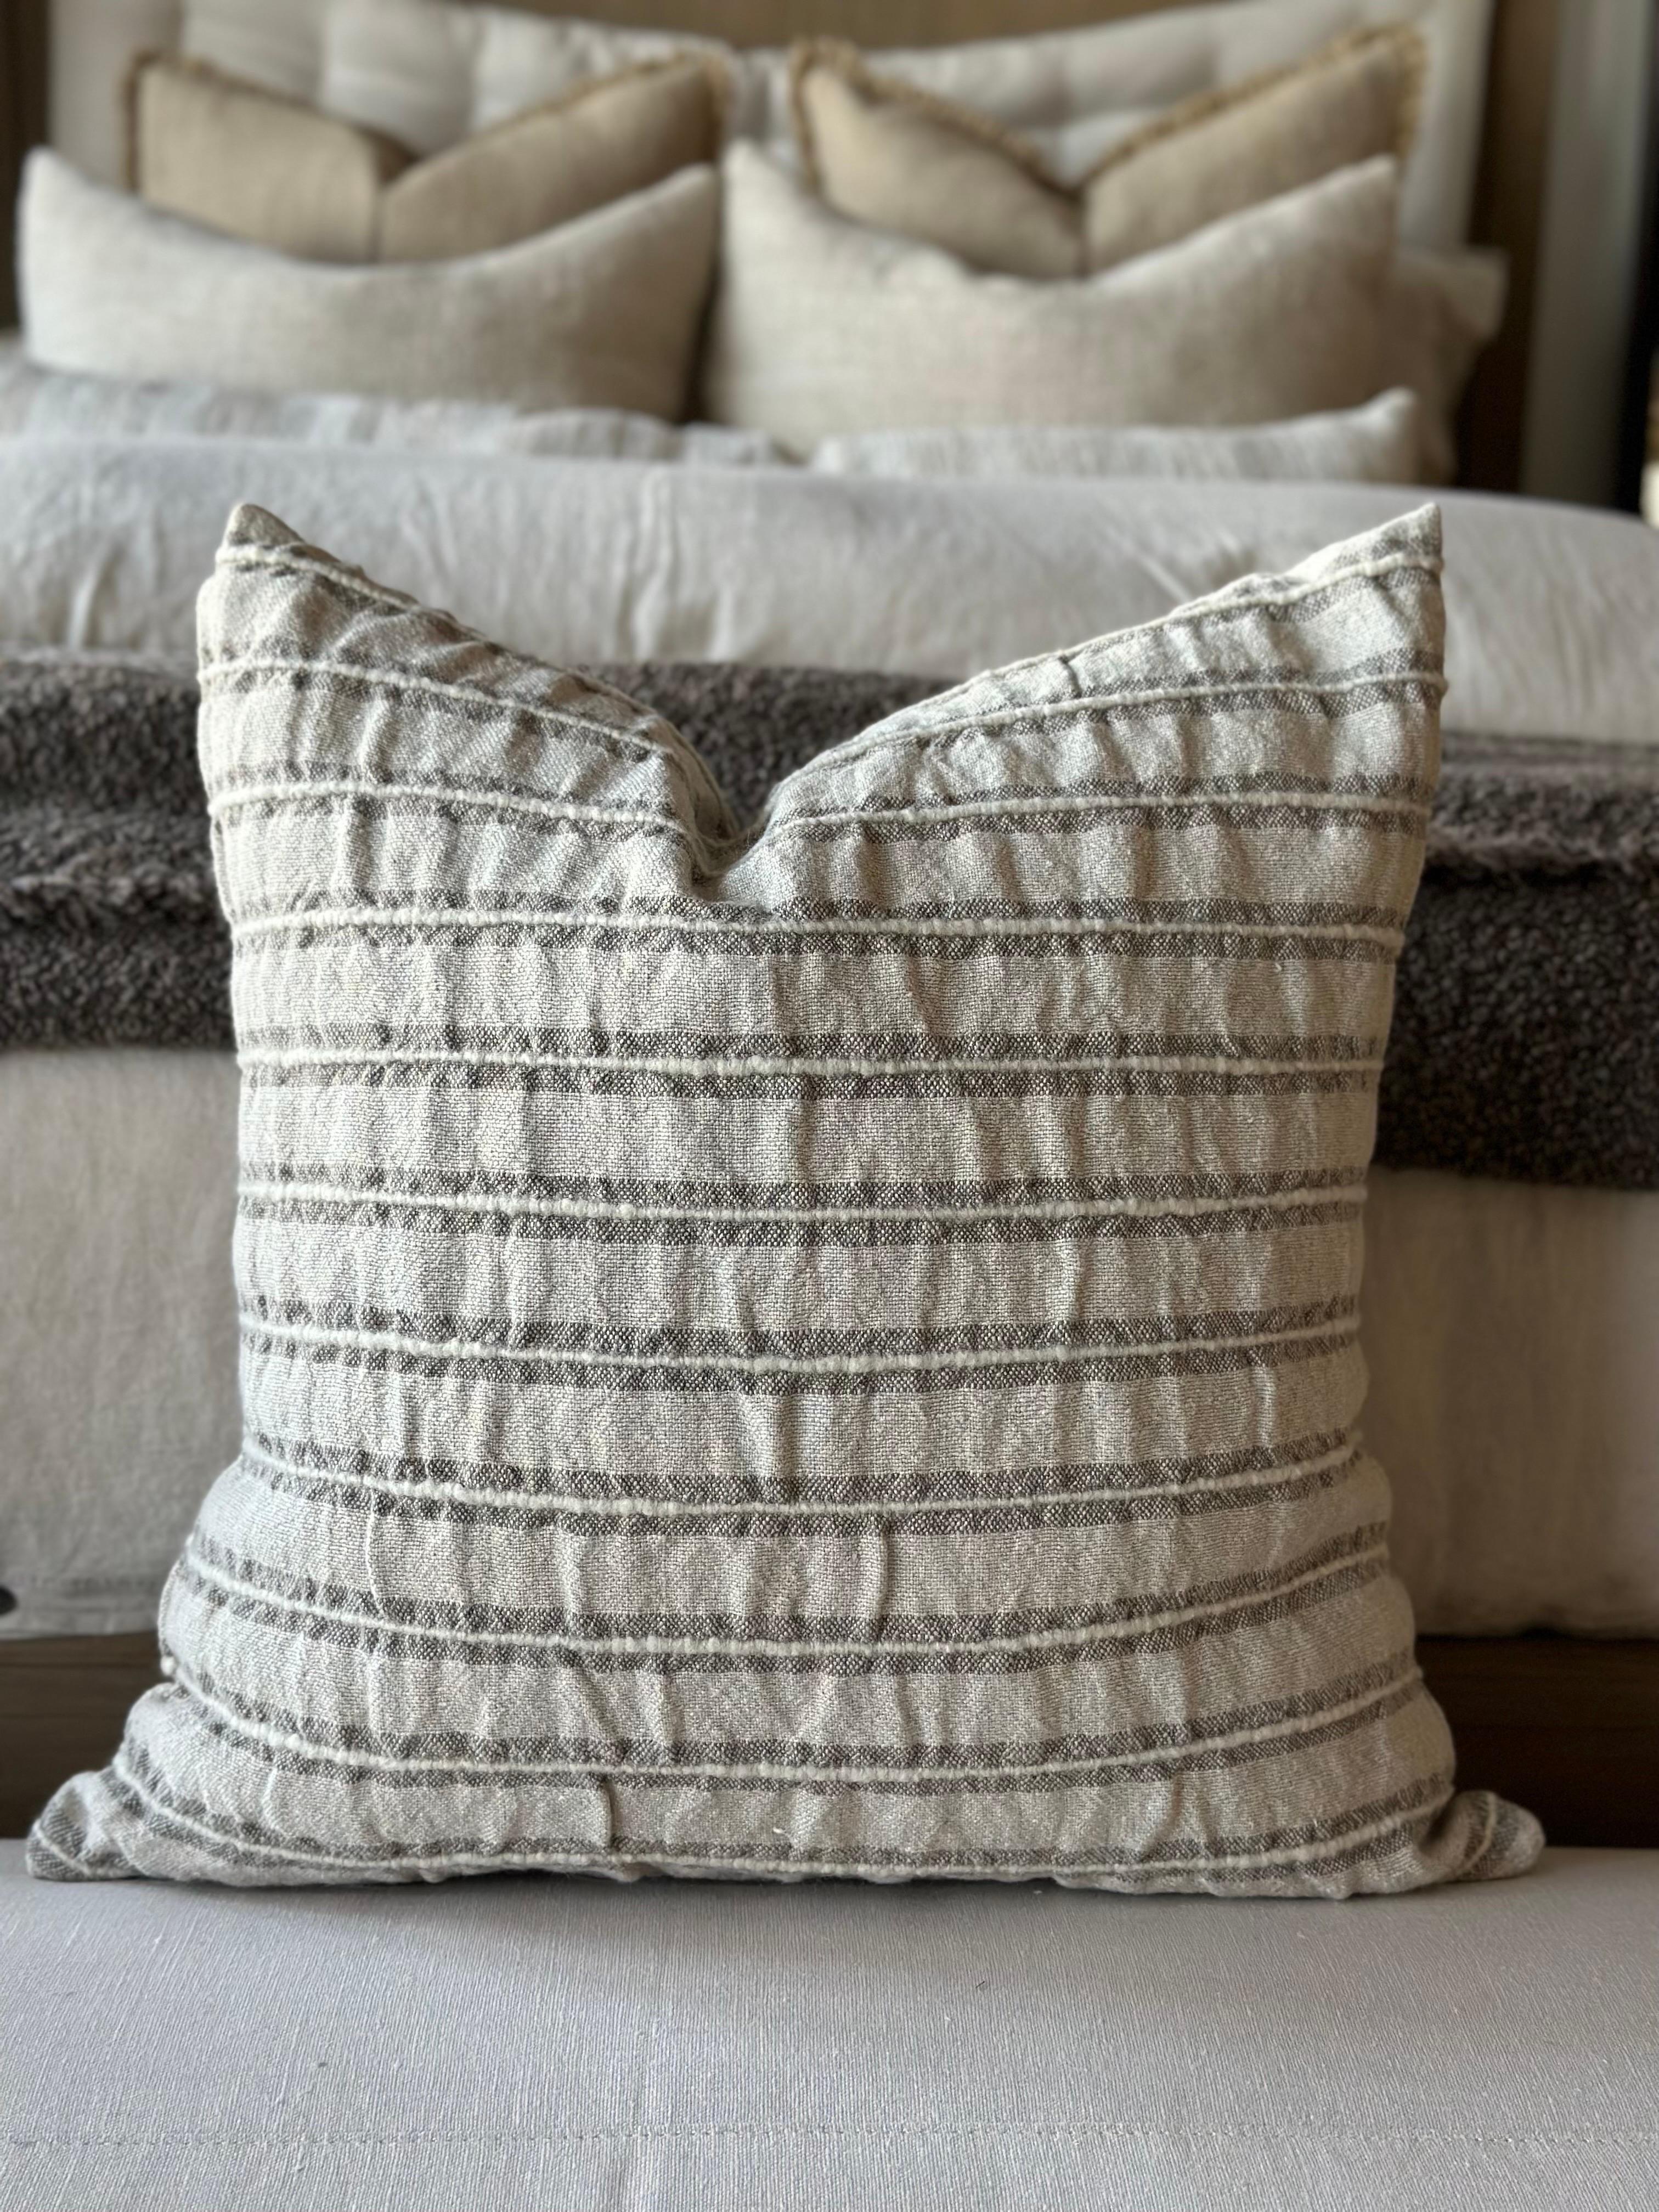 Woven in Belgium using traditional weaving techniques, Low No. 11 combines Belgian linen with soft wool yarns. The slub like yarns alternating color along the warp create an inspired stripe from vintage textiles with some slight variations.
Color: